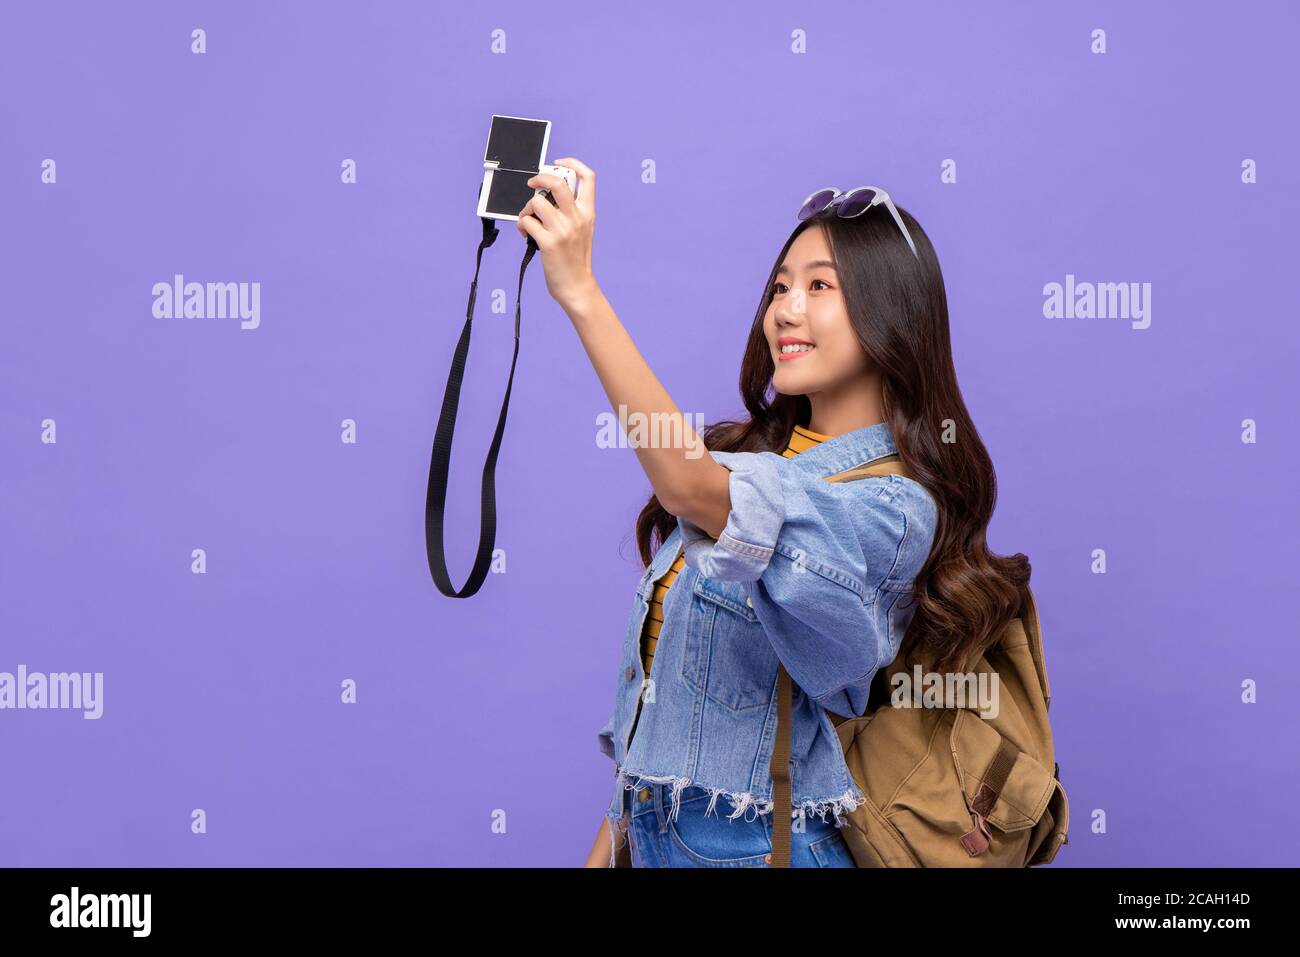 Smiling young Asian woman tourist backpacker taking selfie with camera isolated on purple background Stock Photo